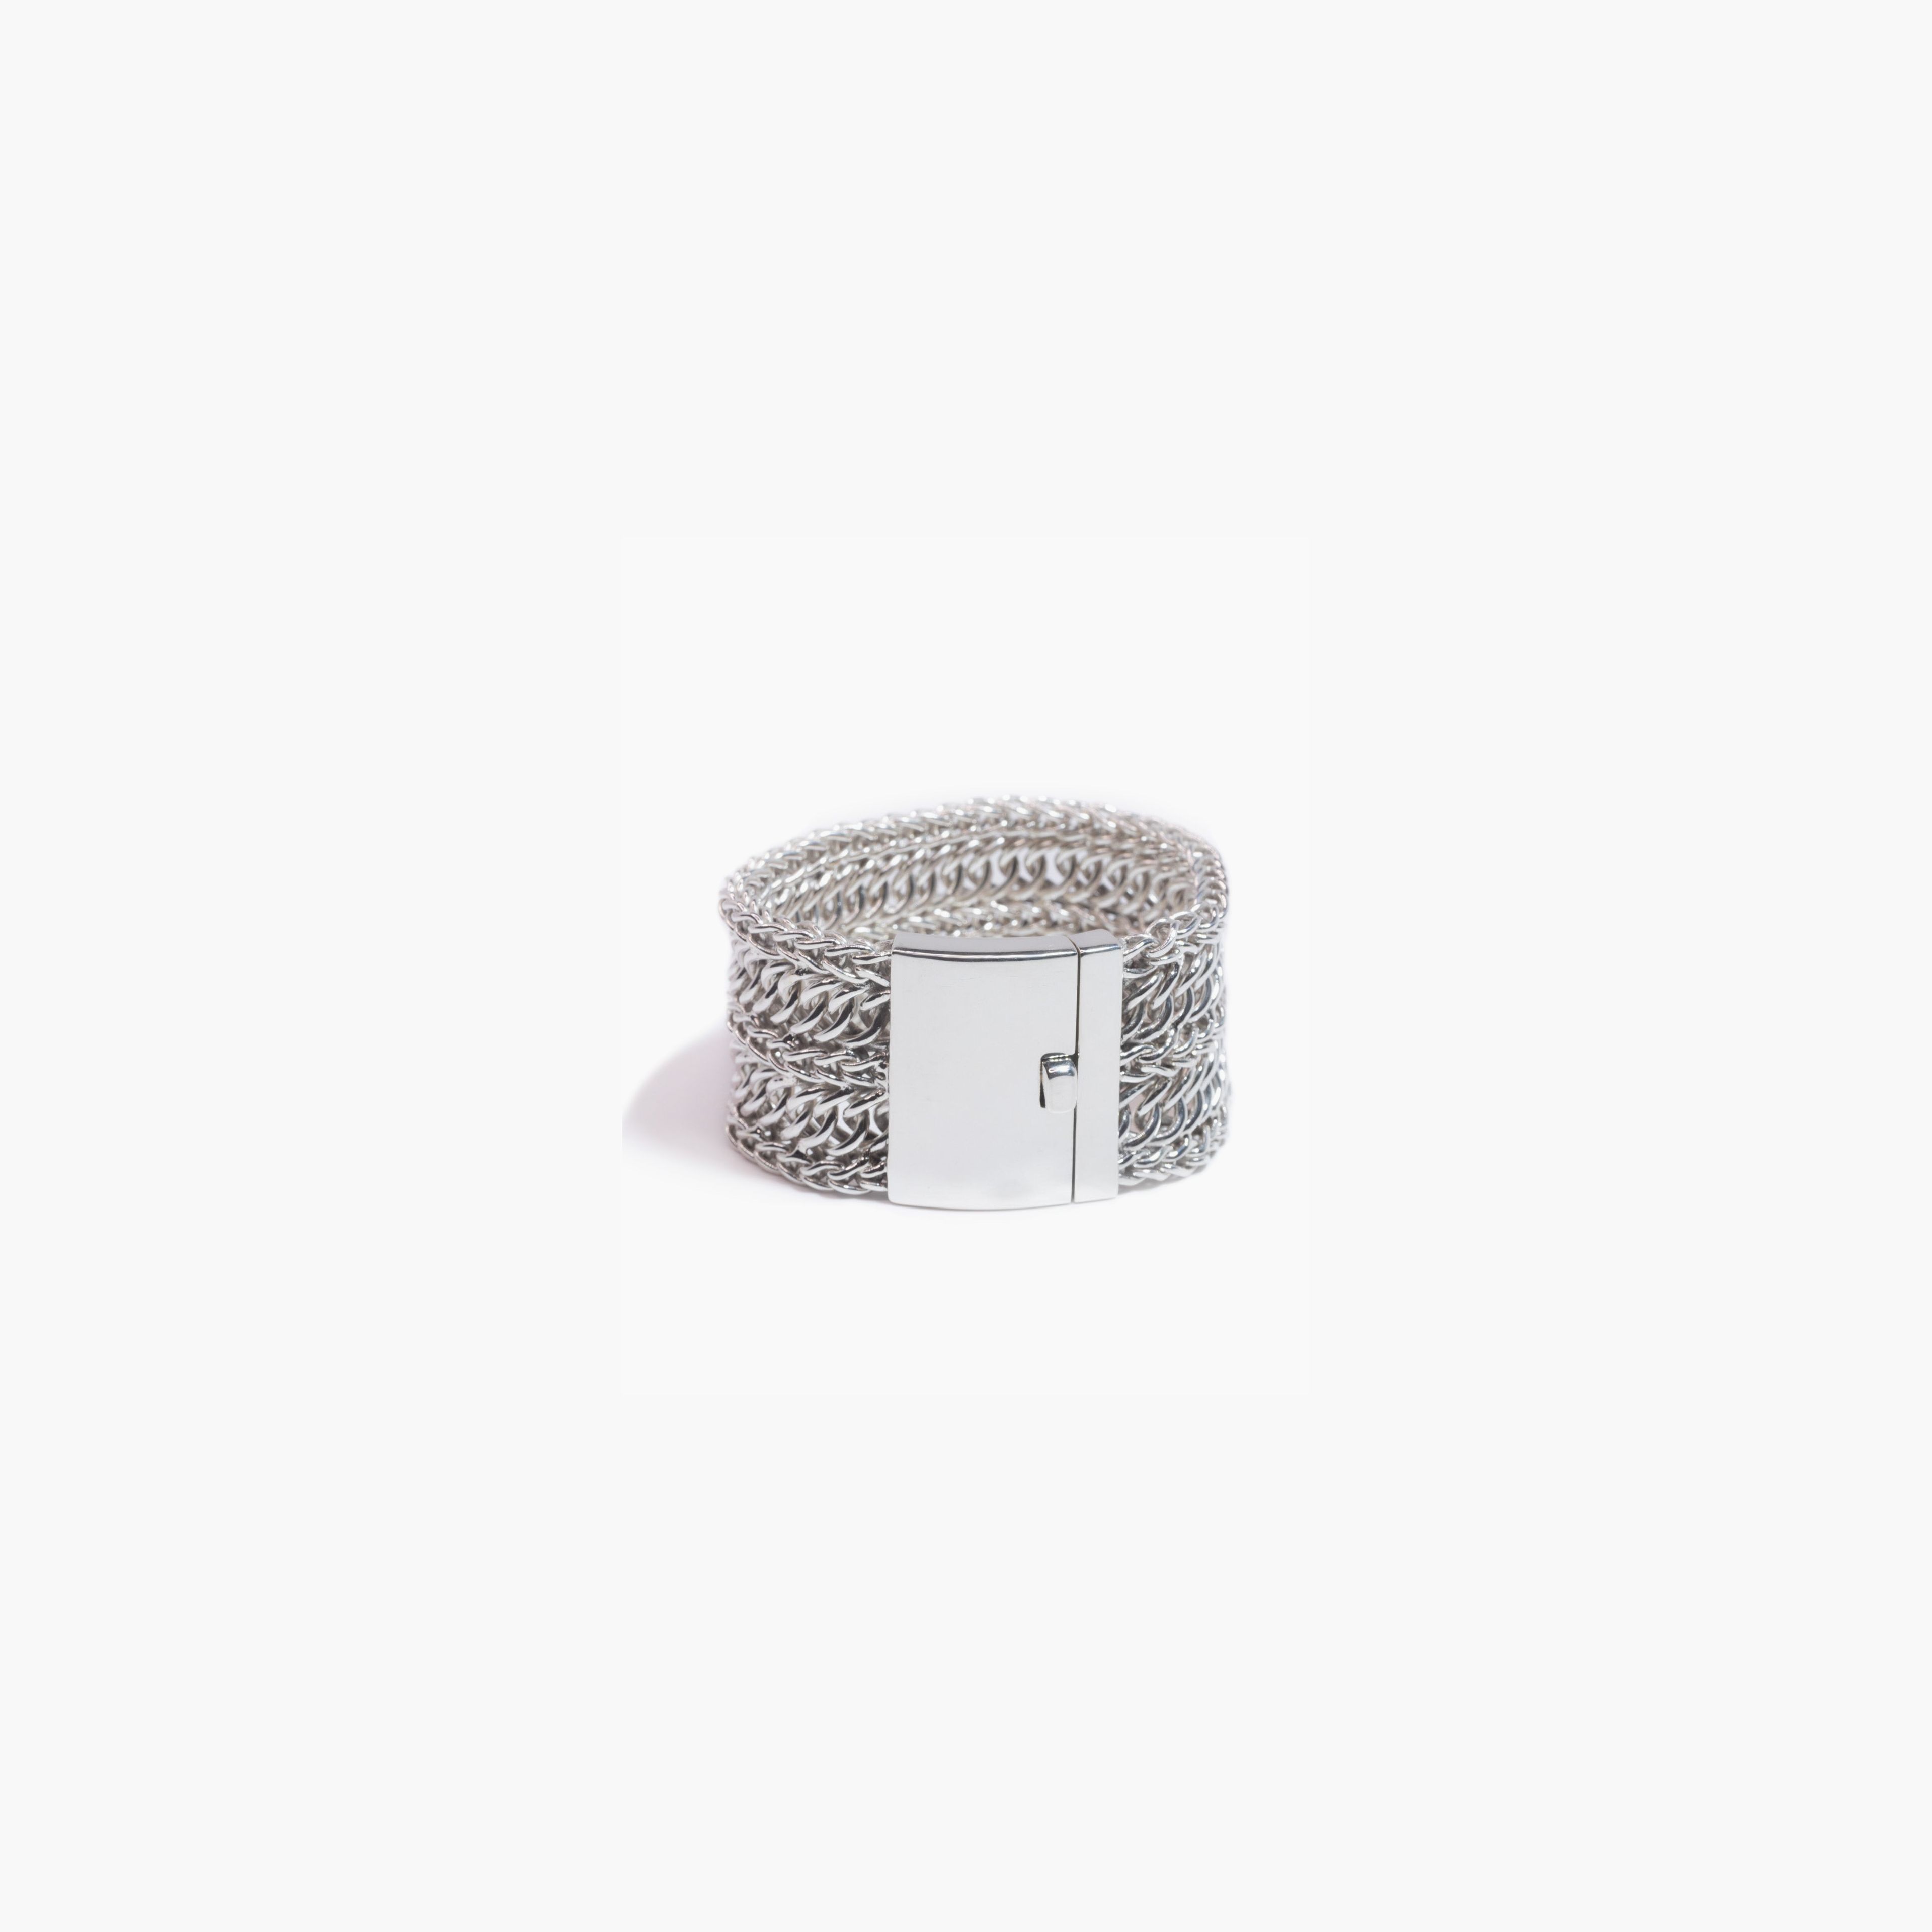 Woven Bracelet with Clasp